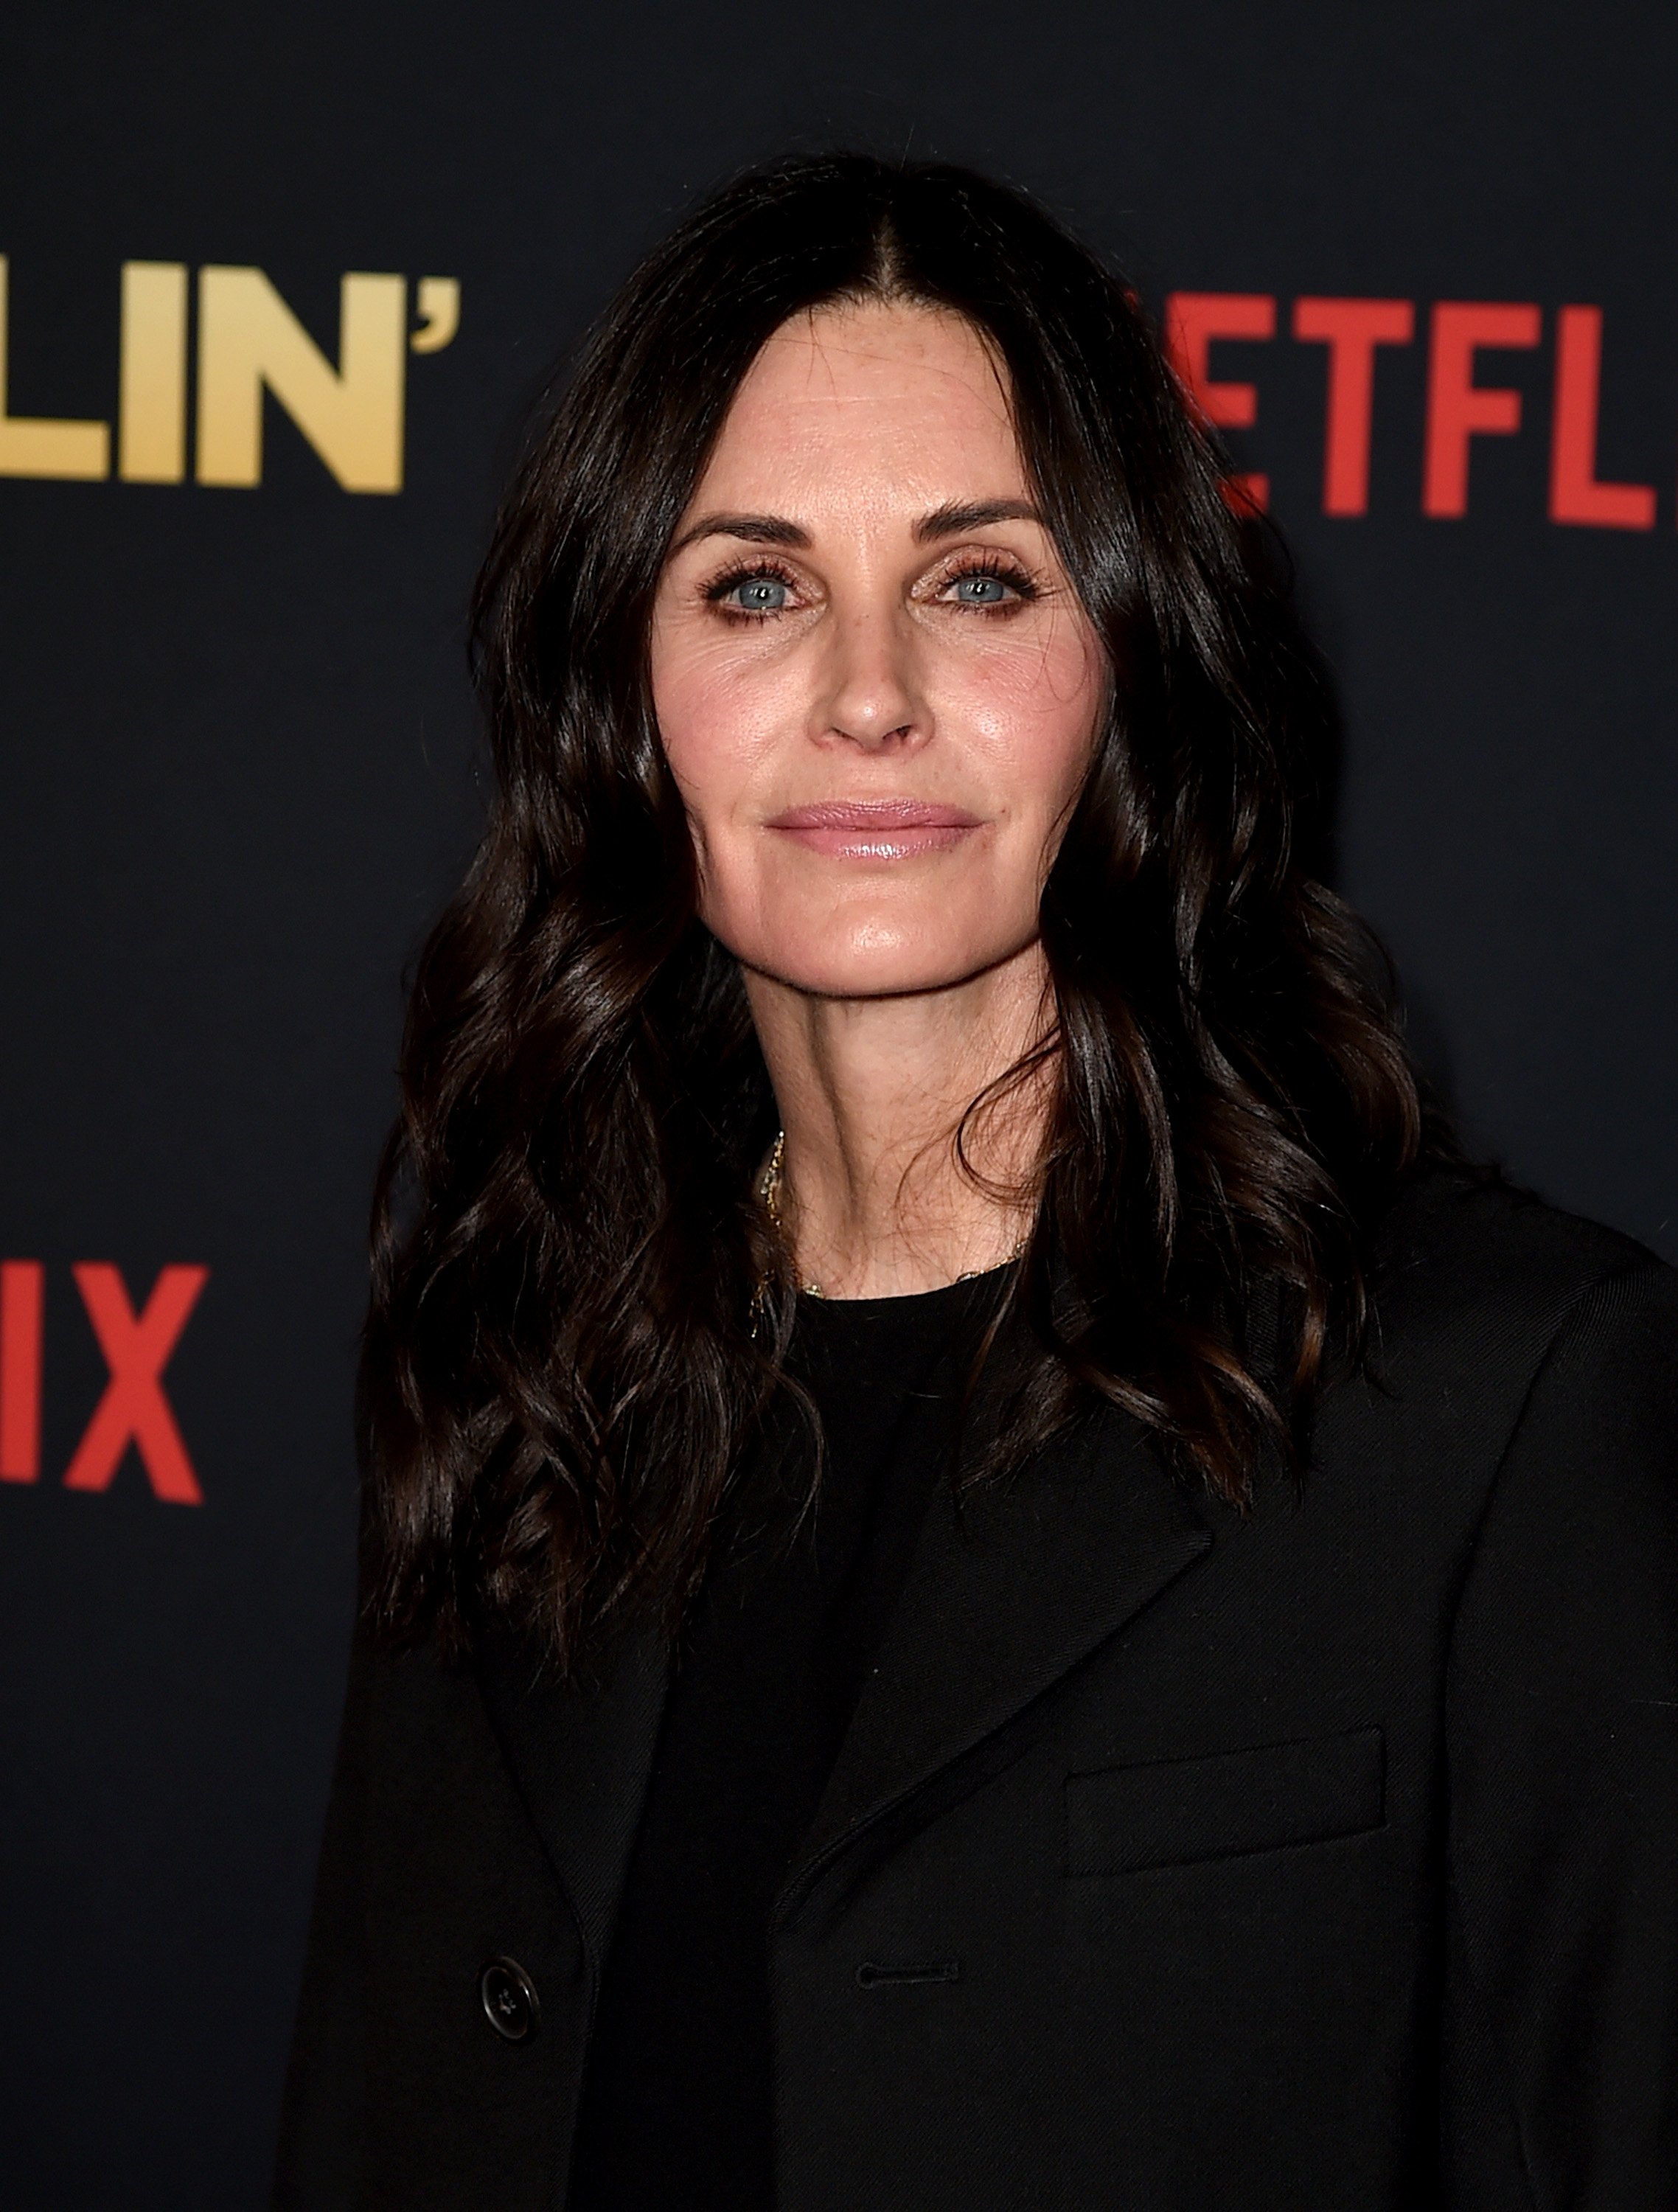 ourteney Cox arrives at the premiere of Netflix's "Dumplin'" at the Chinese Theater on December 6, 2018 in Los Angeles, California.|Photo: Getty Images